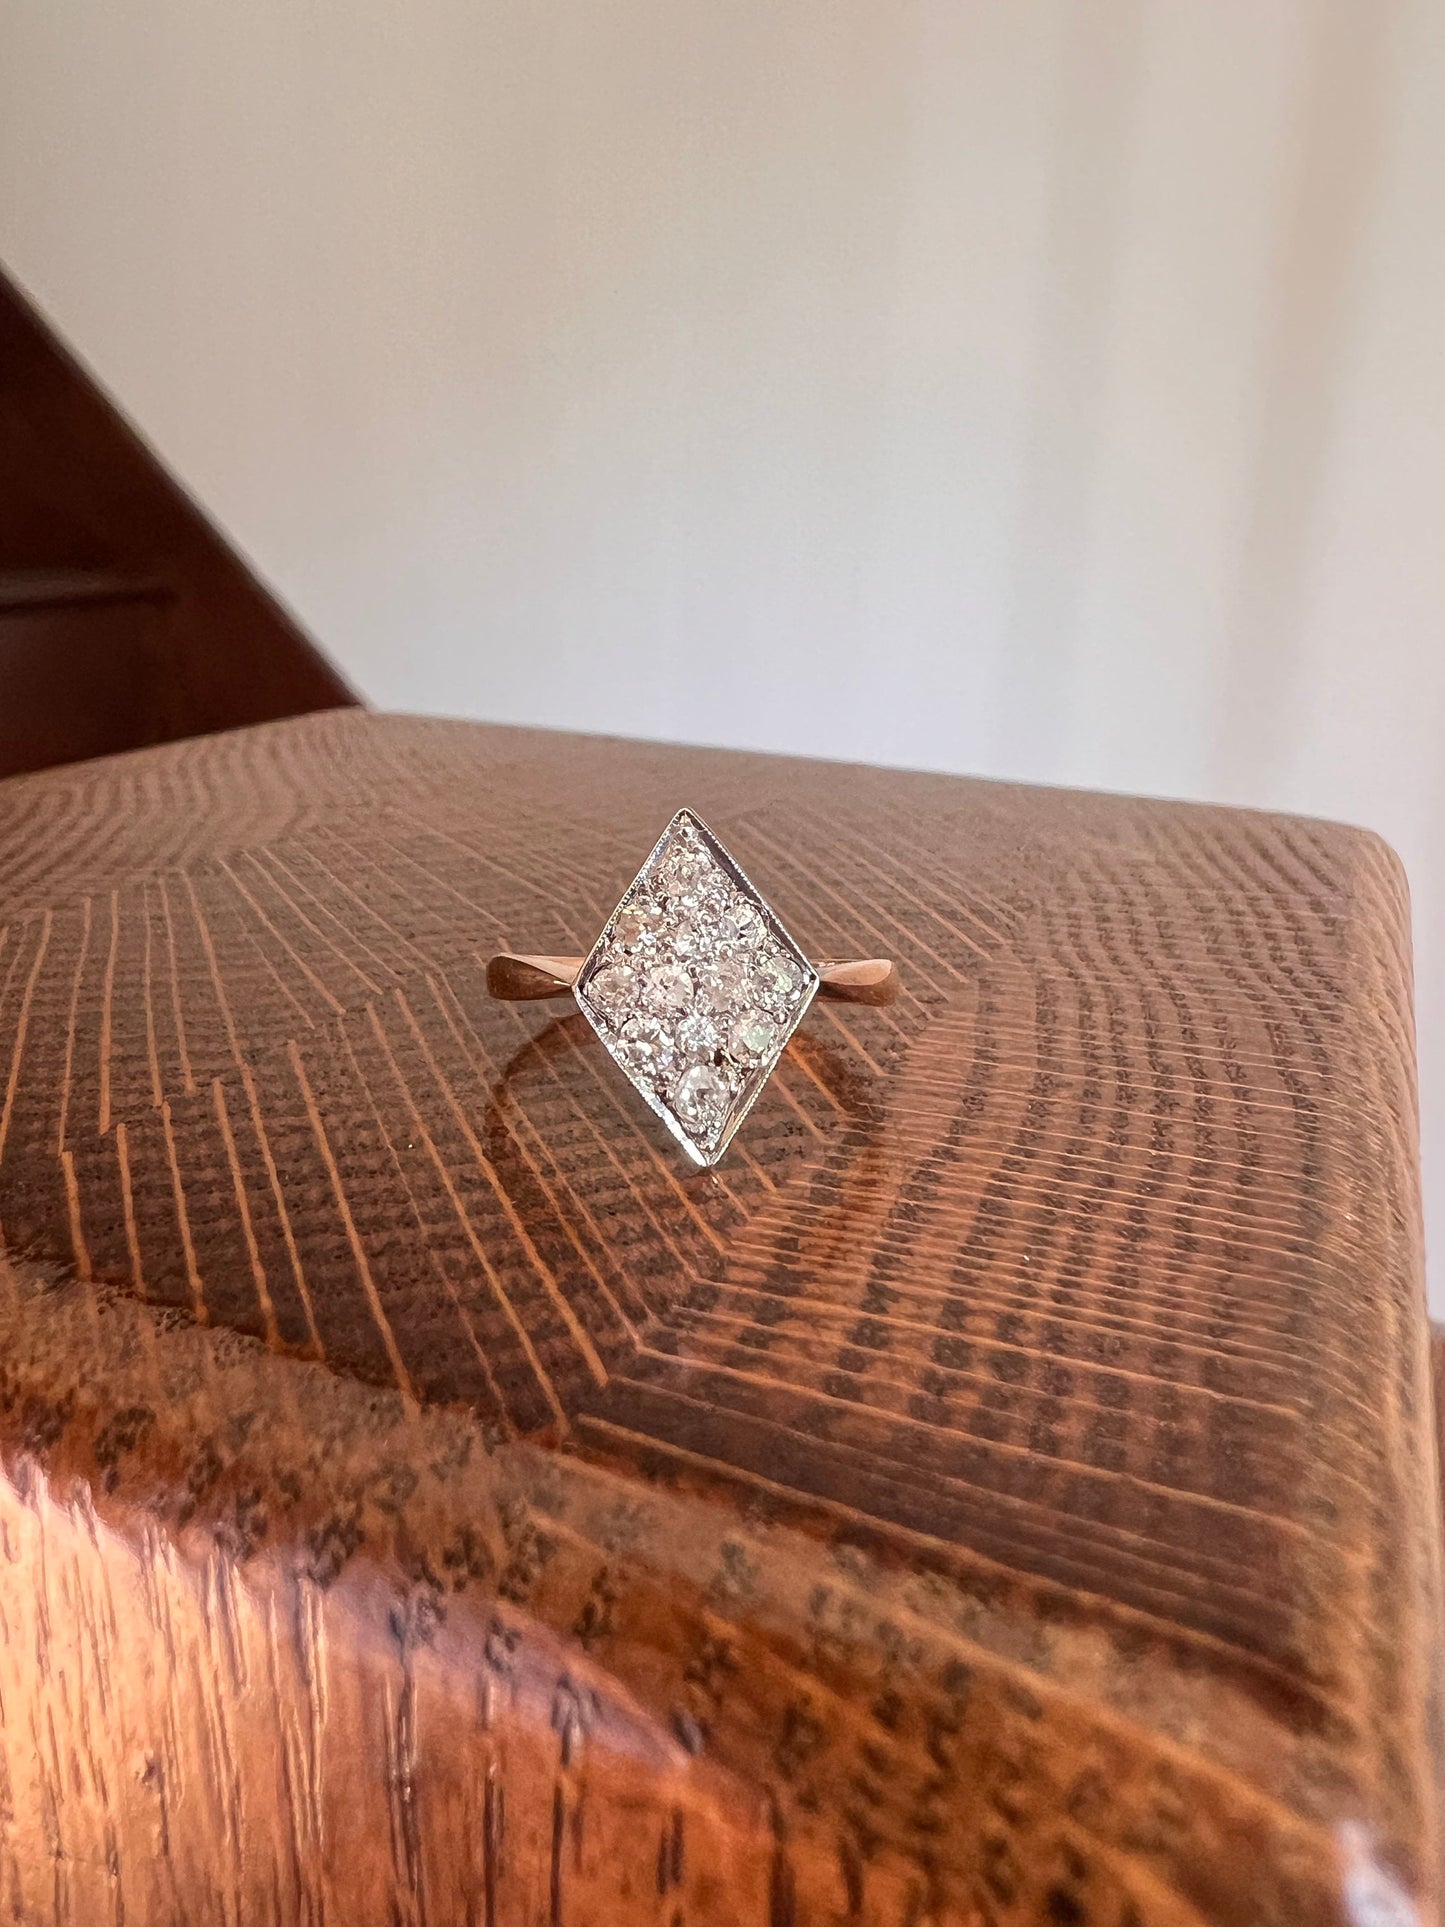 CLUSTER Antique KITE Ring .5 Carat Old Mine Cut Diamond Cluster Grid Ring French Antique 18k Gold Geometric Stacker Cobblestone Gift Half Ct